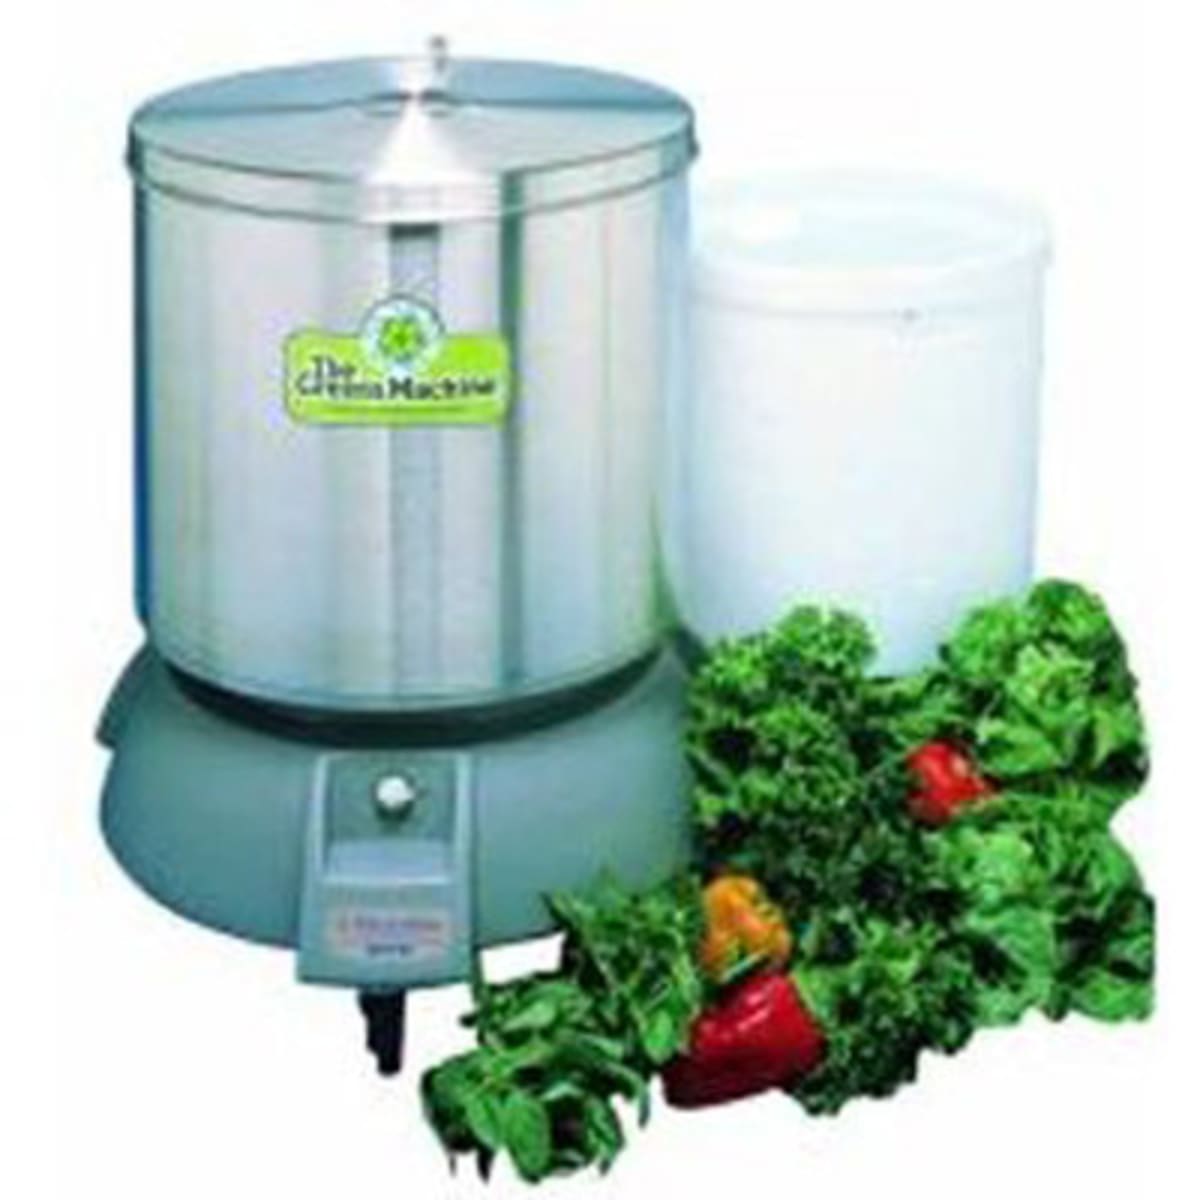 Electrolux VP2 with Free Shipping - Salad Spinner & Vegetable Dryer